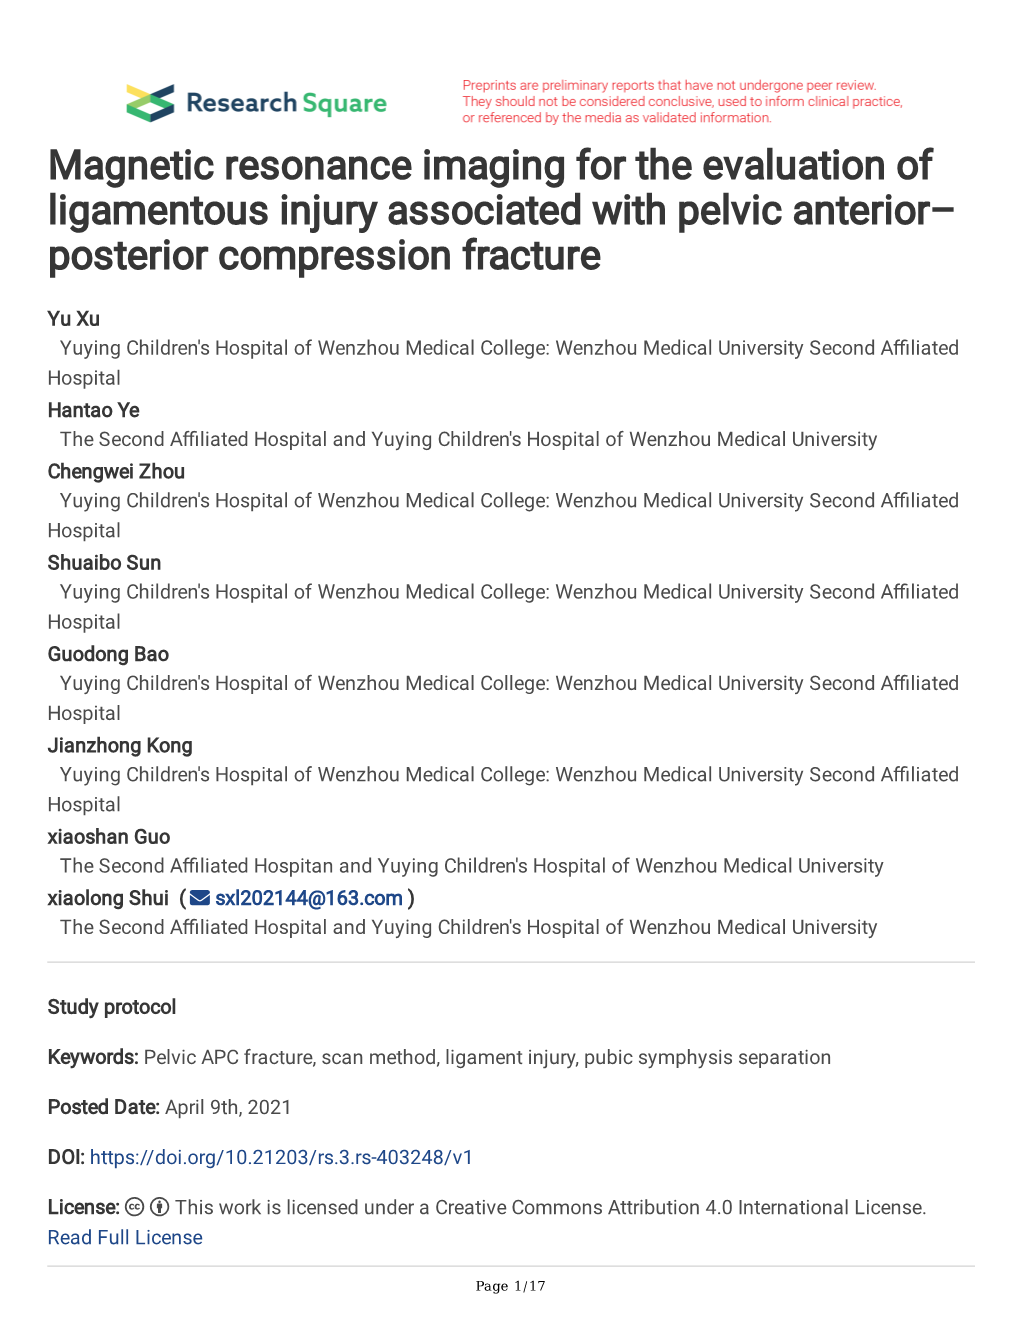 Magnetic Resonance Imaging for the Evaluation of Ligamentous Injury Associated with Pelvic Anterior– Posterior Compression Fracture